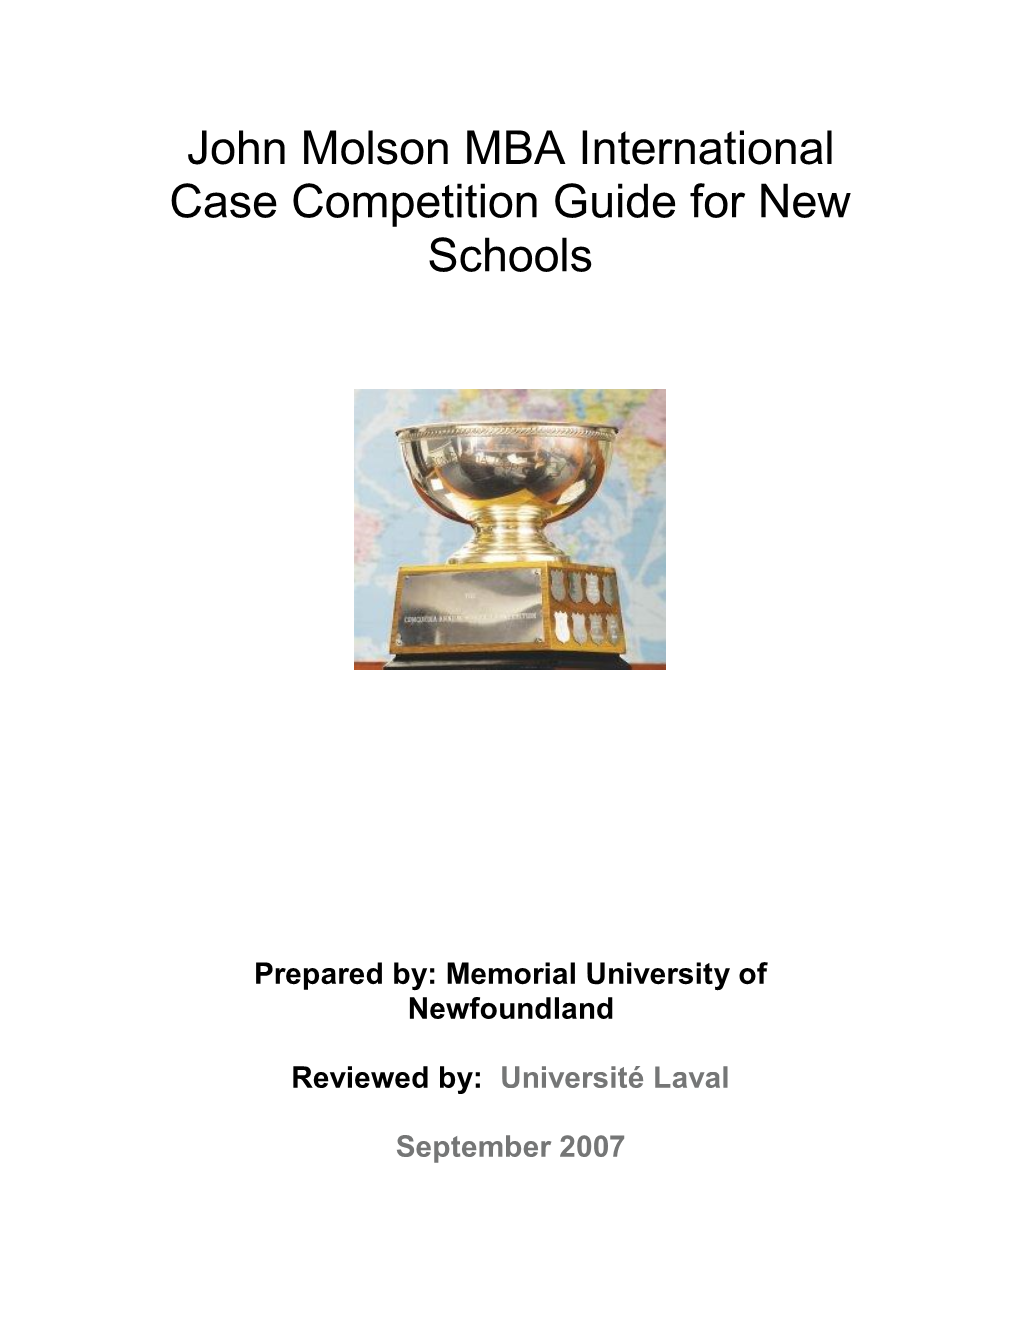 John Molson MBA International Case Competition Guide for New Schools